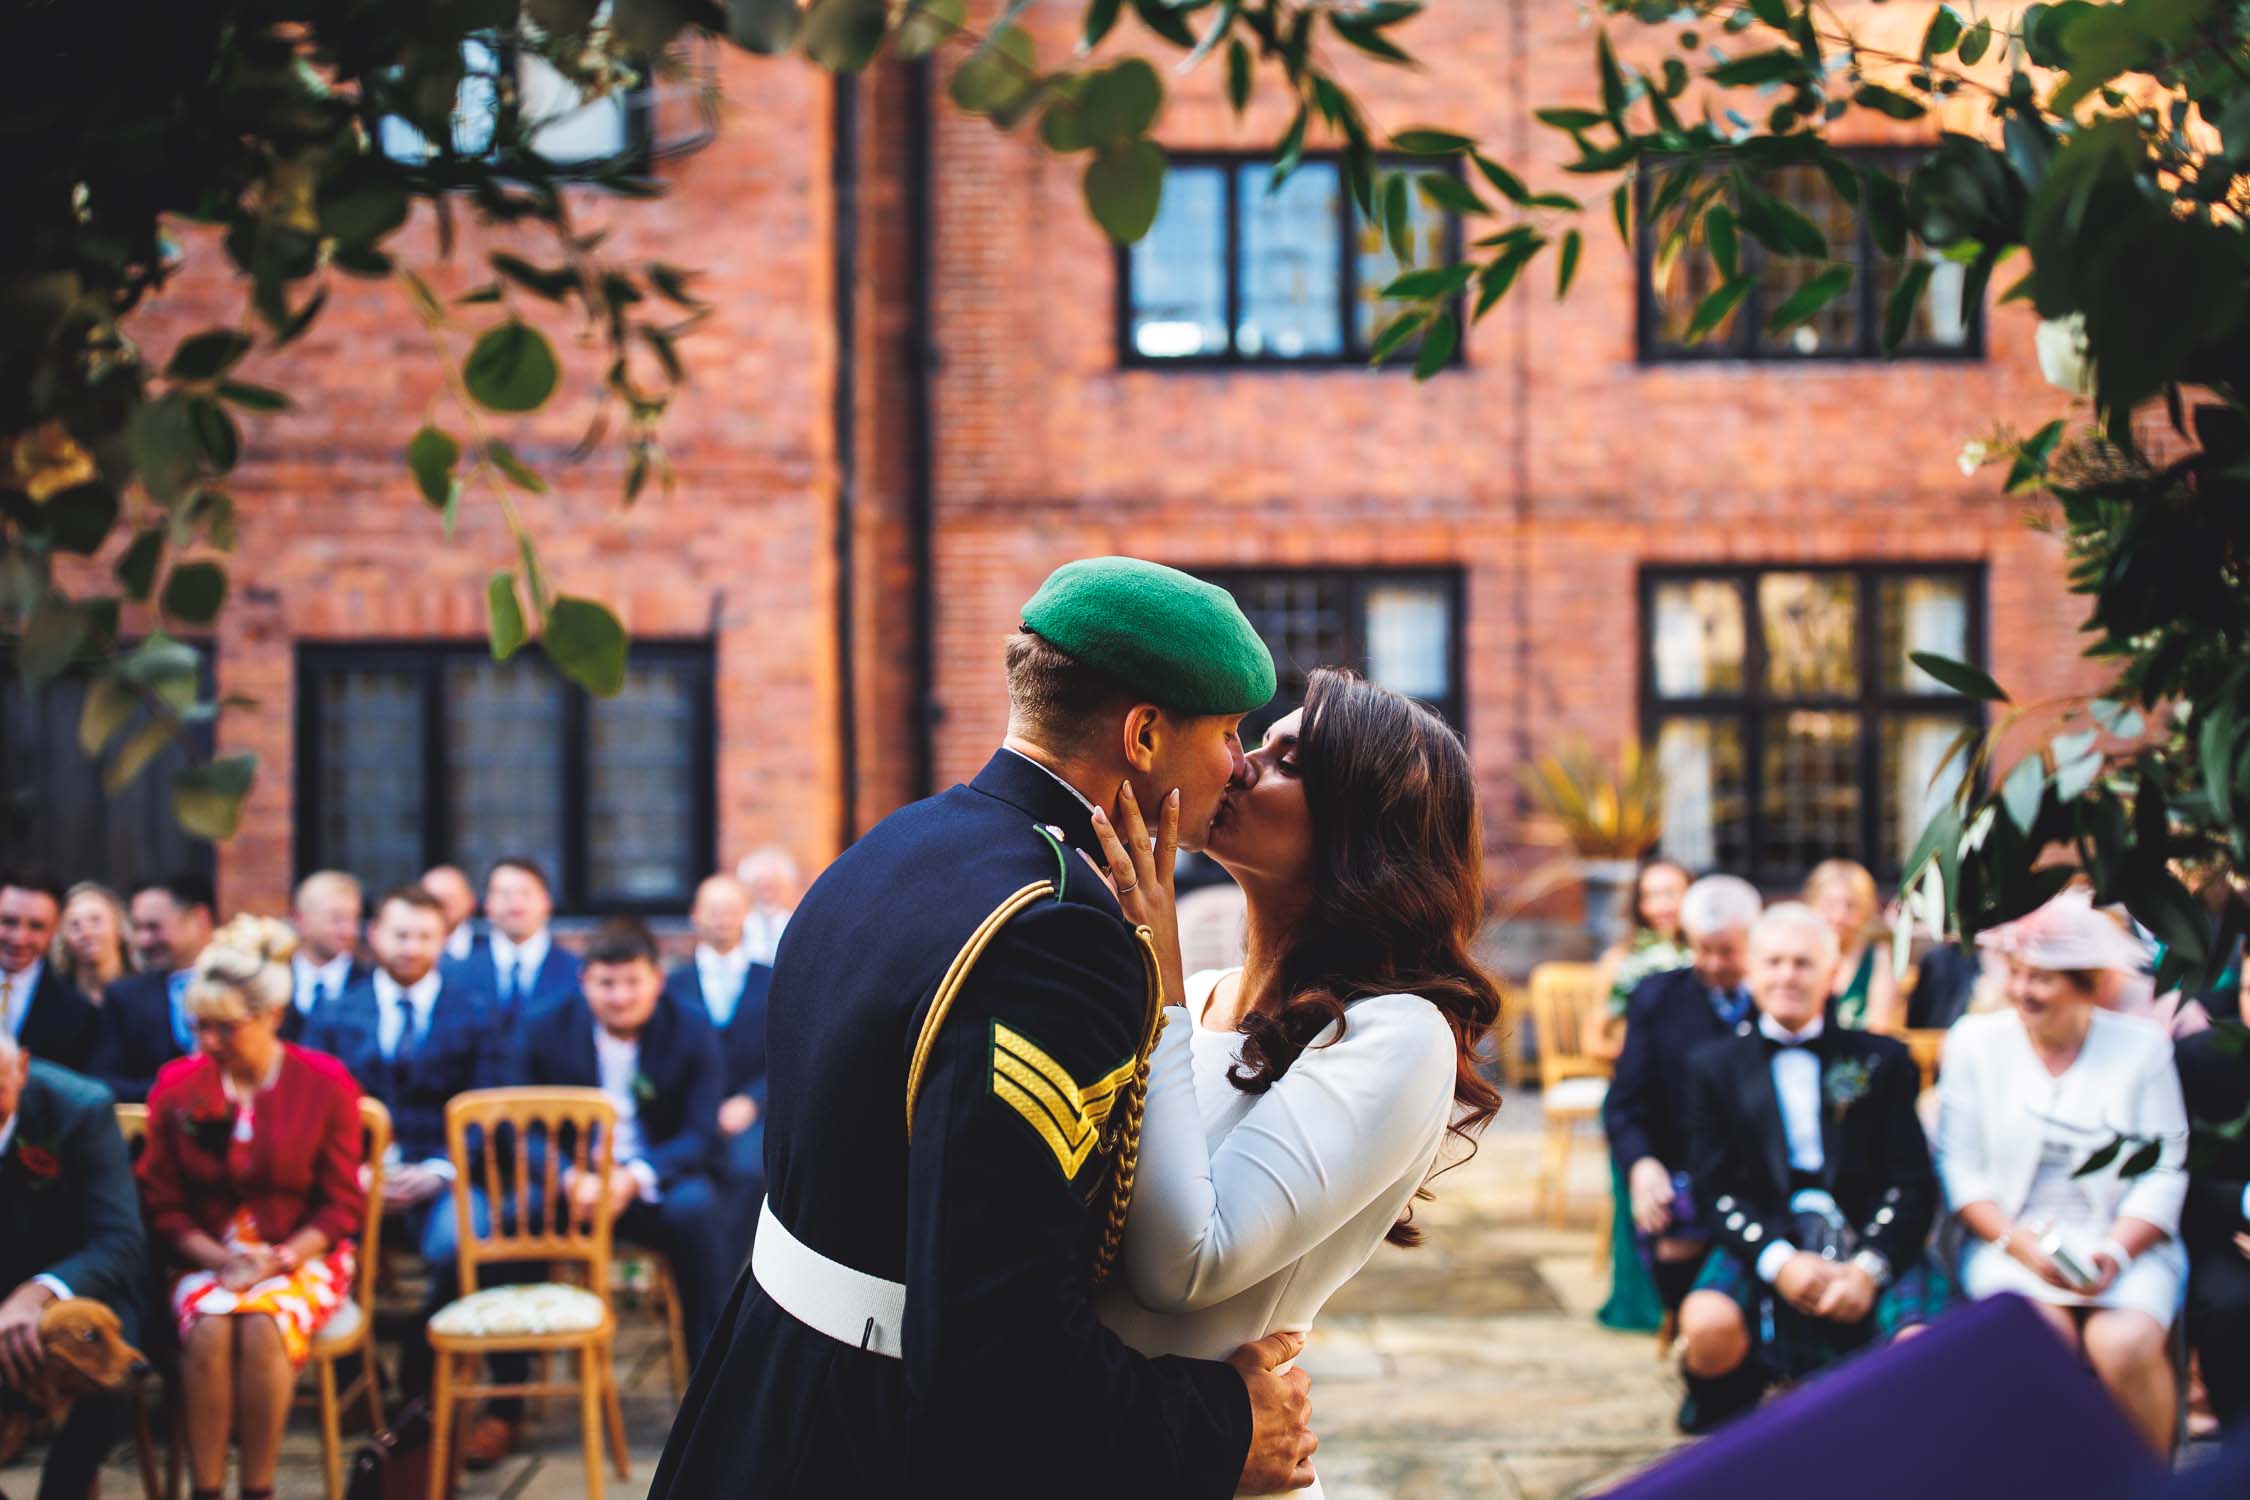 First kiss of bride and groom at Brinsop Court in Herefordshire.